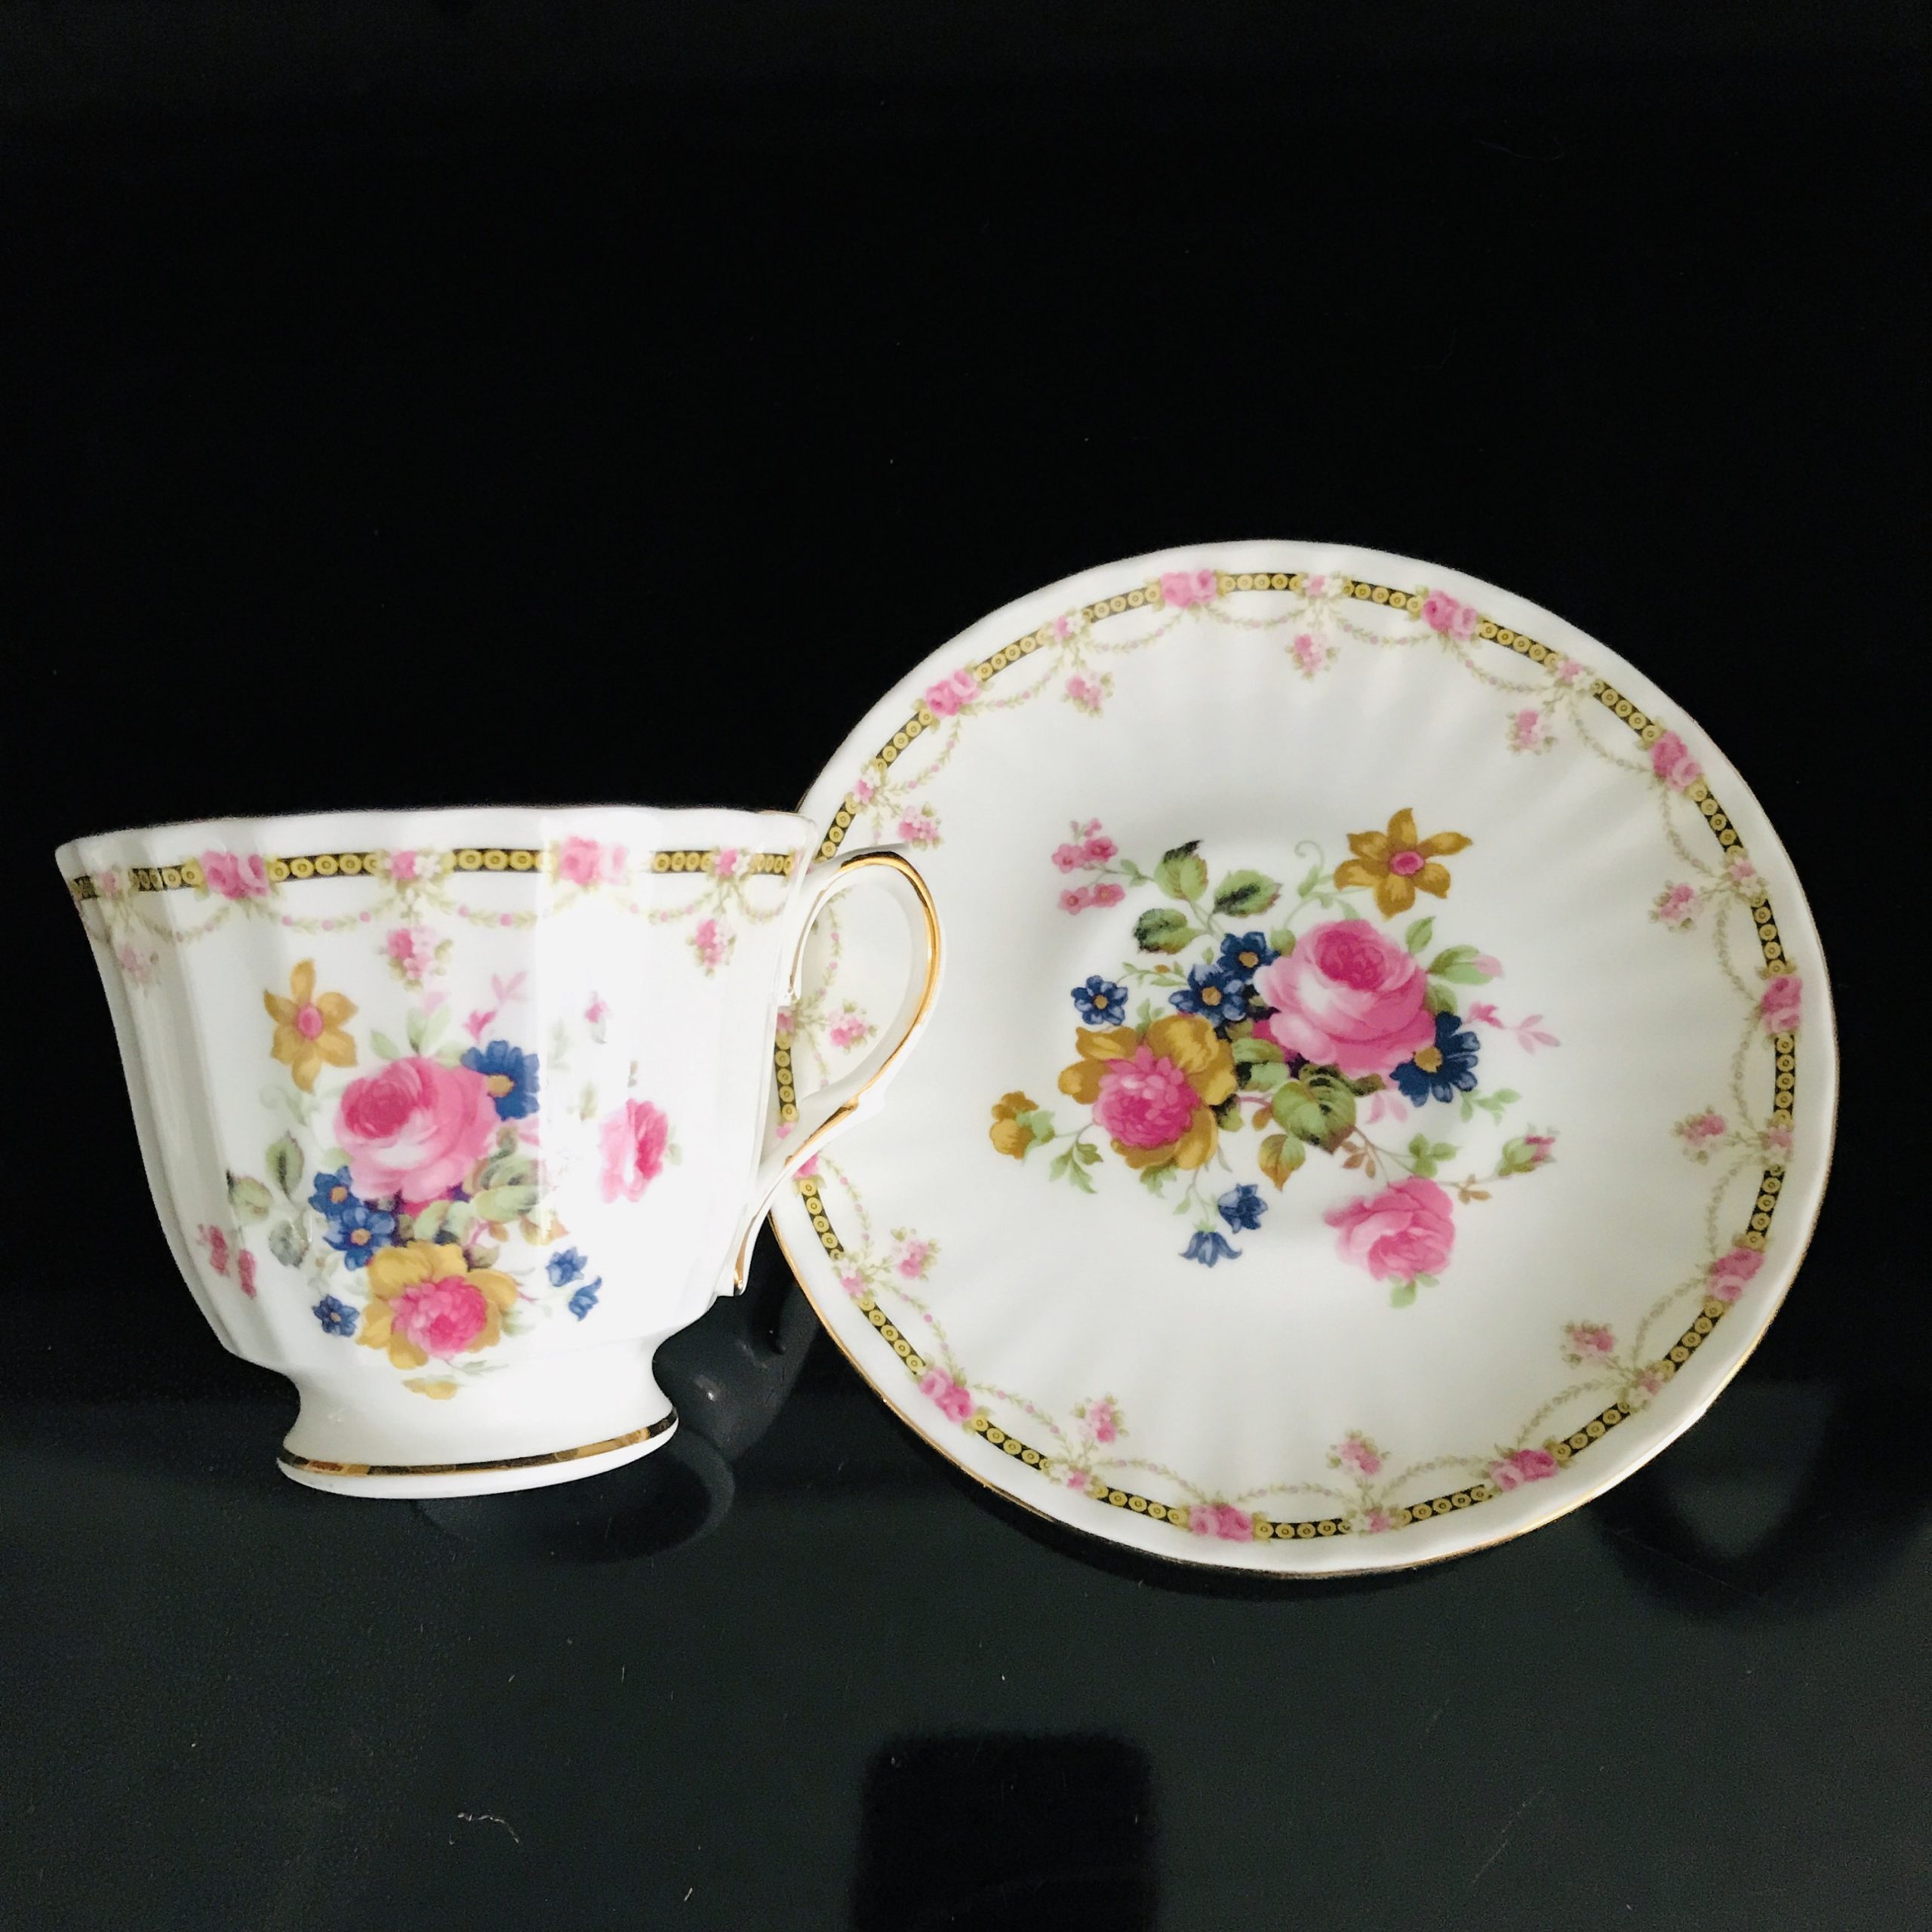 Rose Swag Tea Cups and Saucers, Set of 4